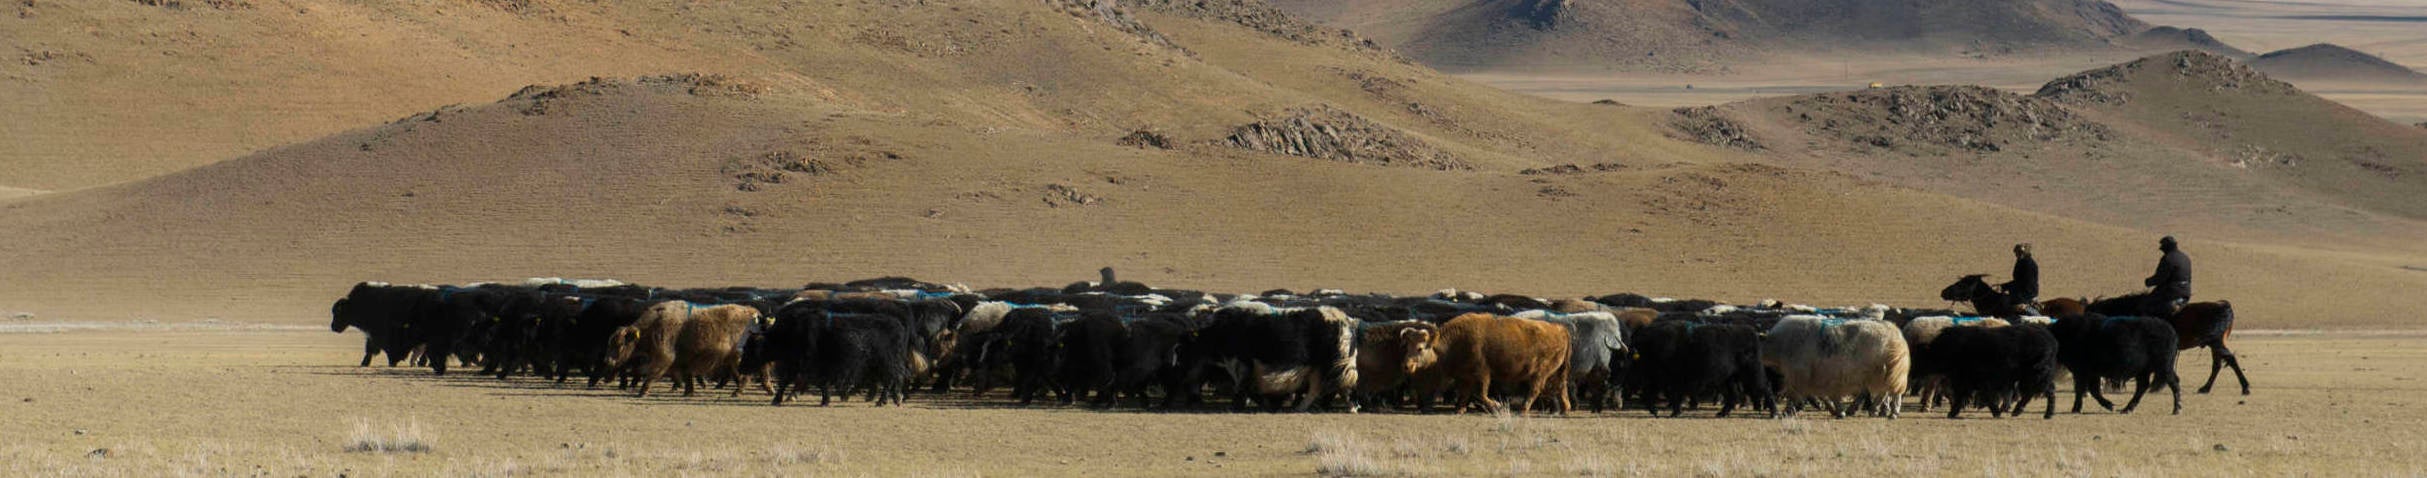 Dreaming of Mongolia: How I’ll book my bucket-list trip after the pandemic